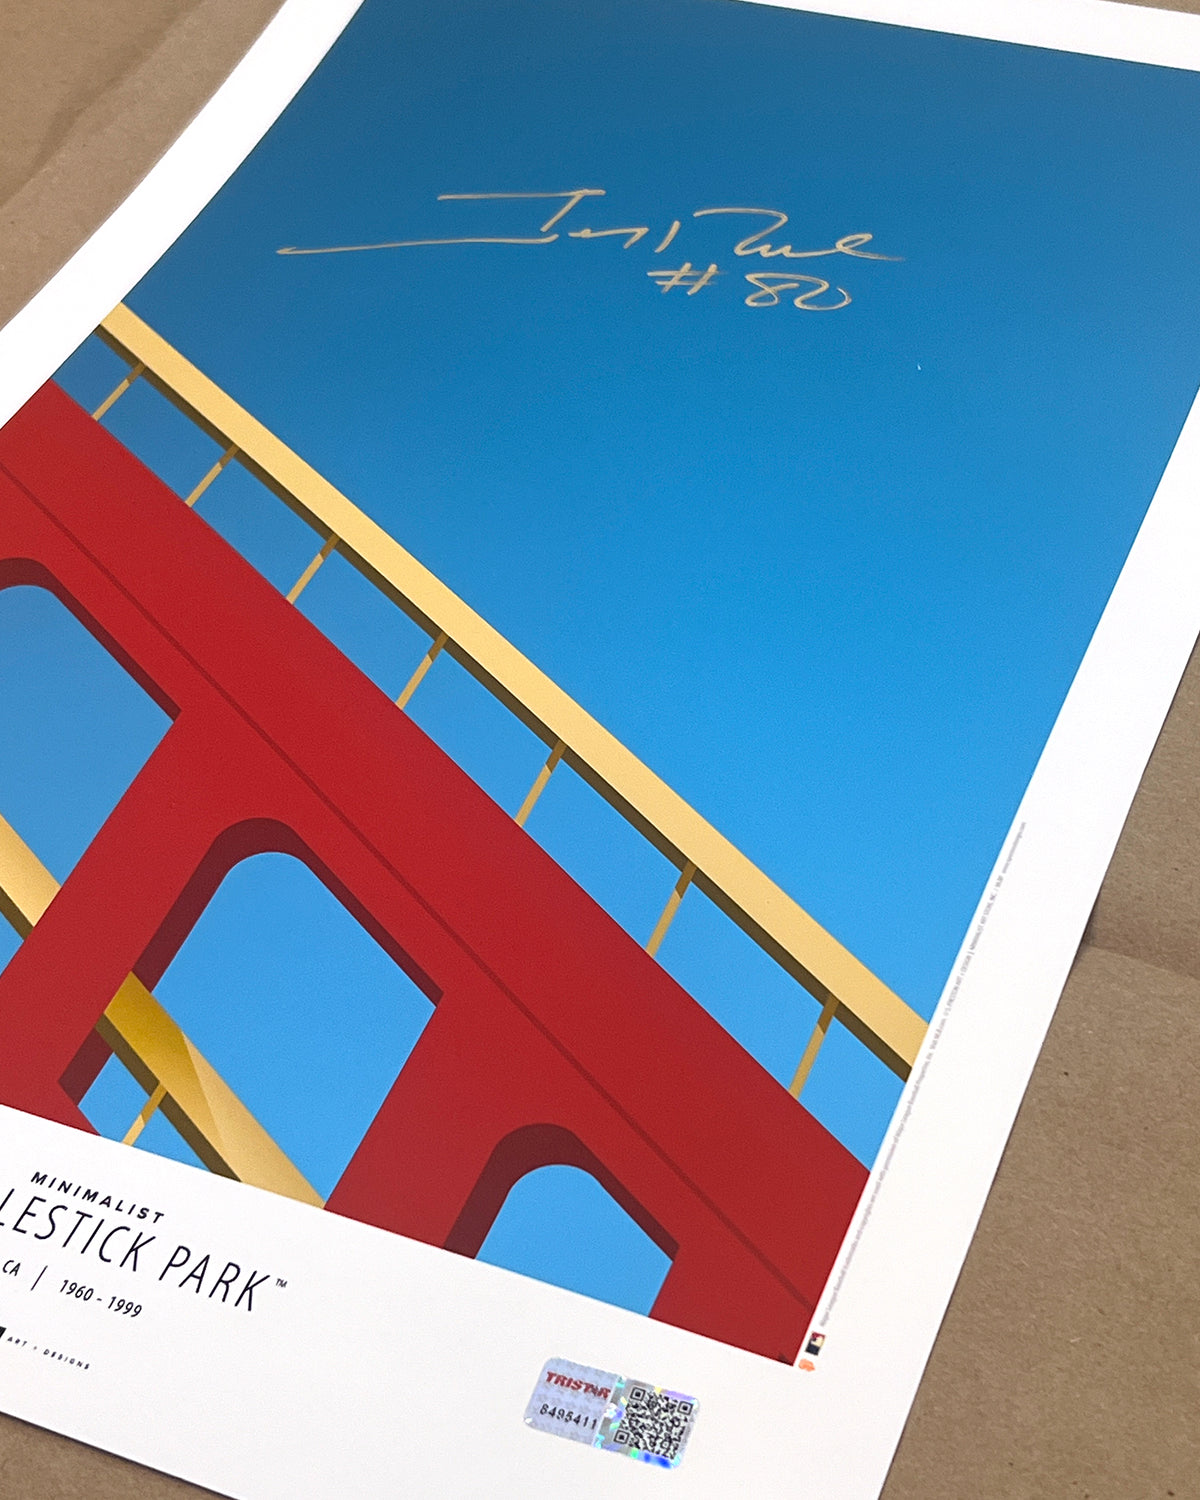 Minimalist Candlestick Park - Jerry Rice Autographed - Poster Print - Authenticated